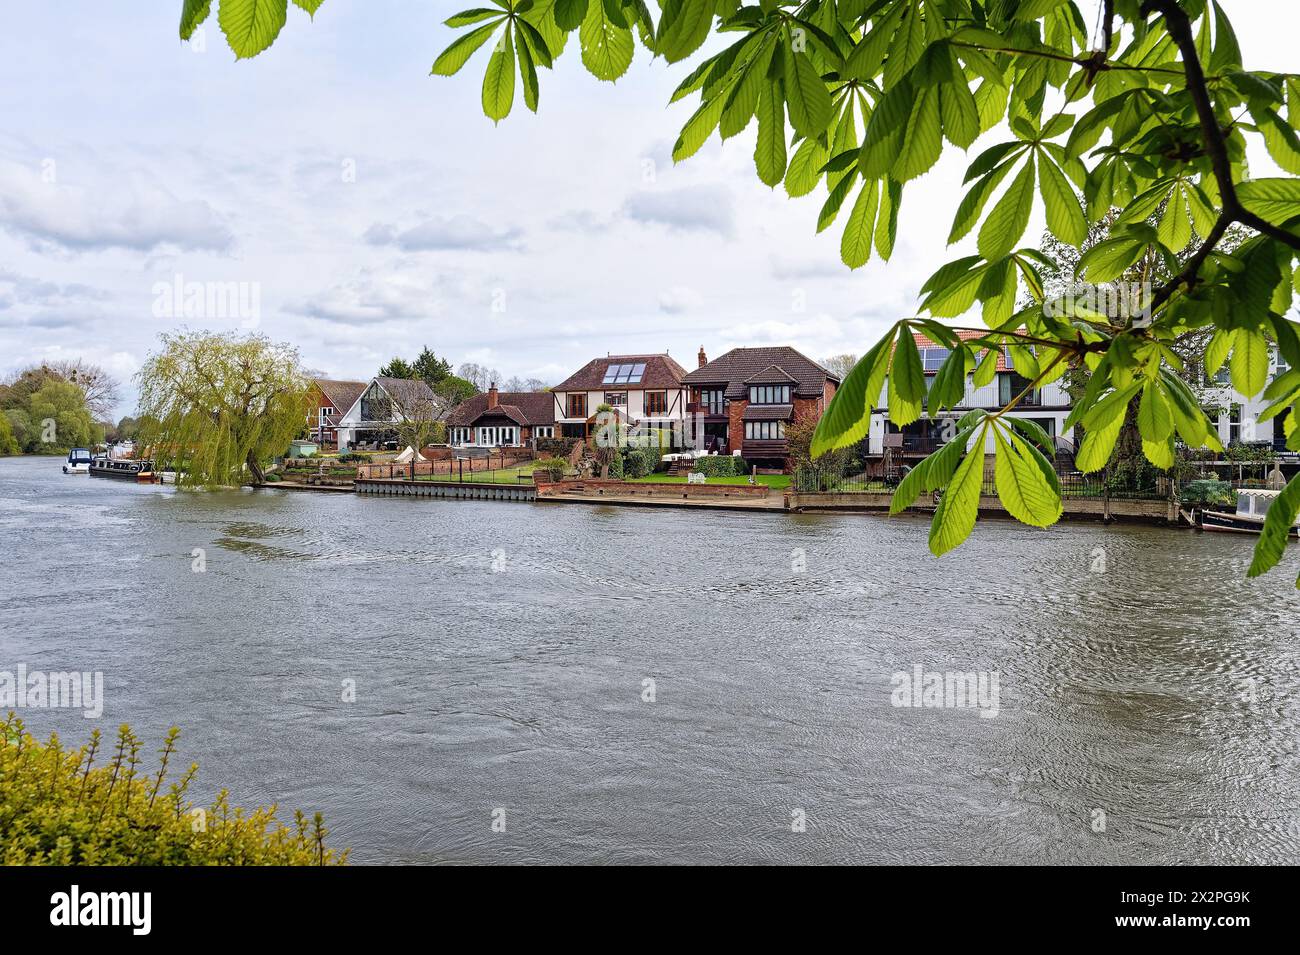 Riverside houses at Wraysbury as viewed from across the River Thames at Old Windsor Berkshire England UK Stock Photo